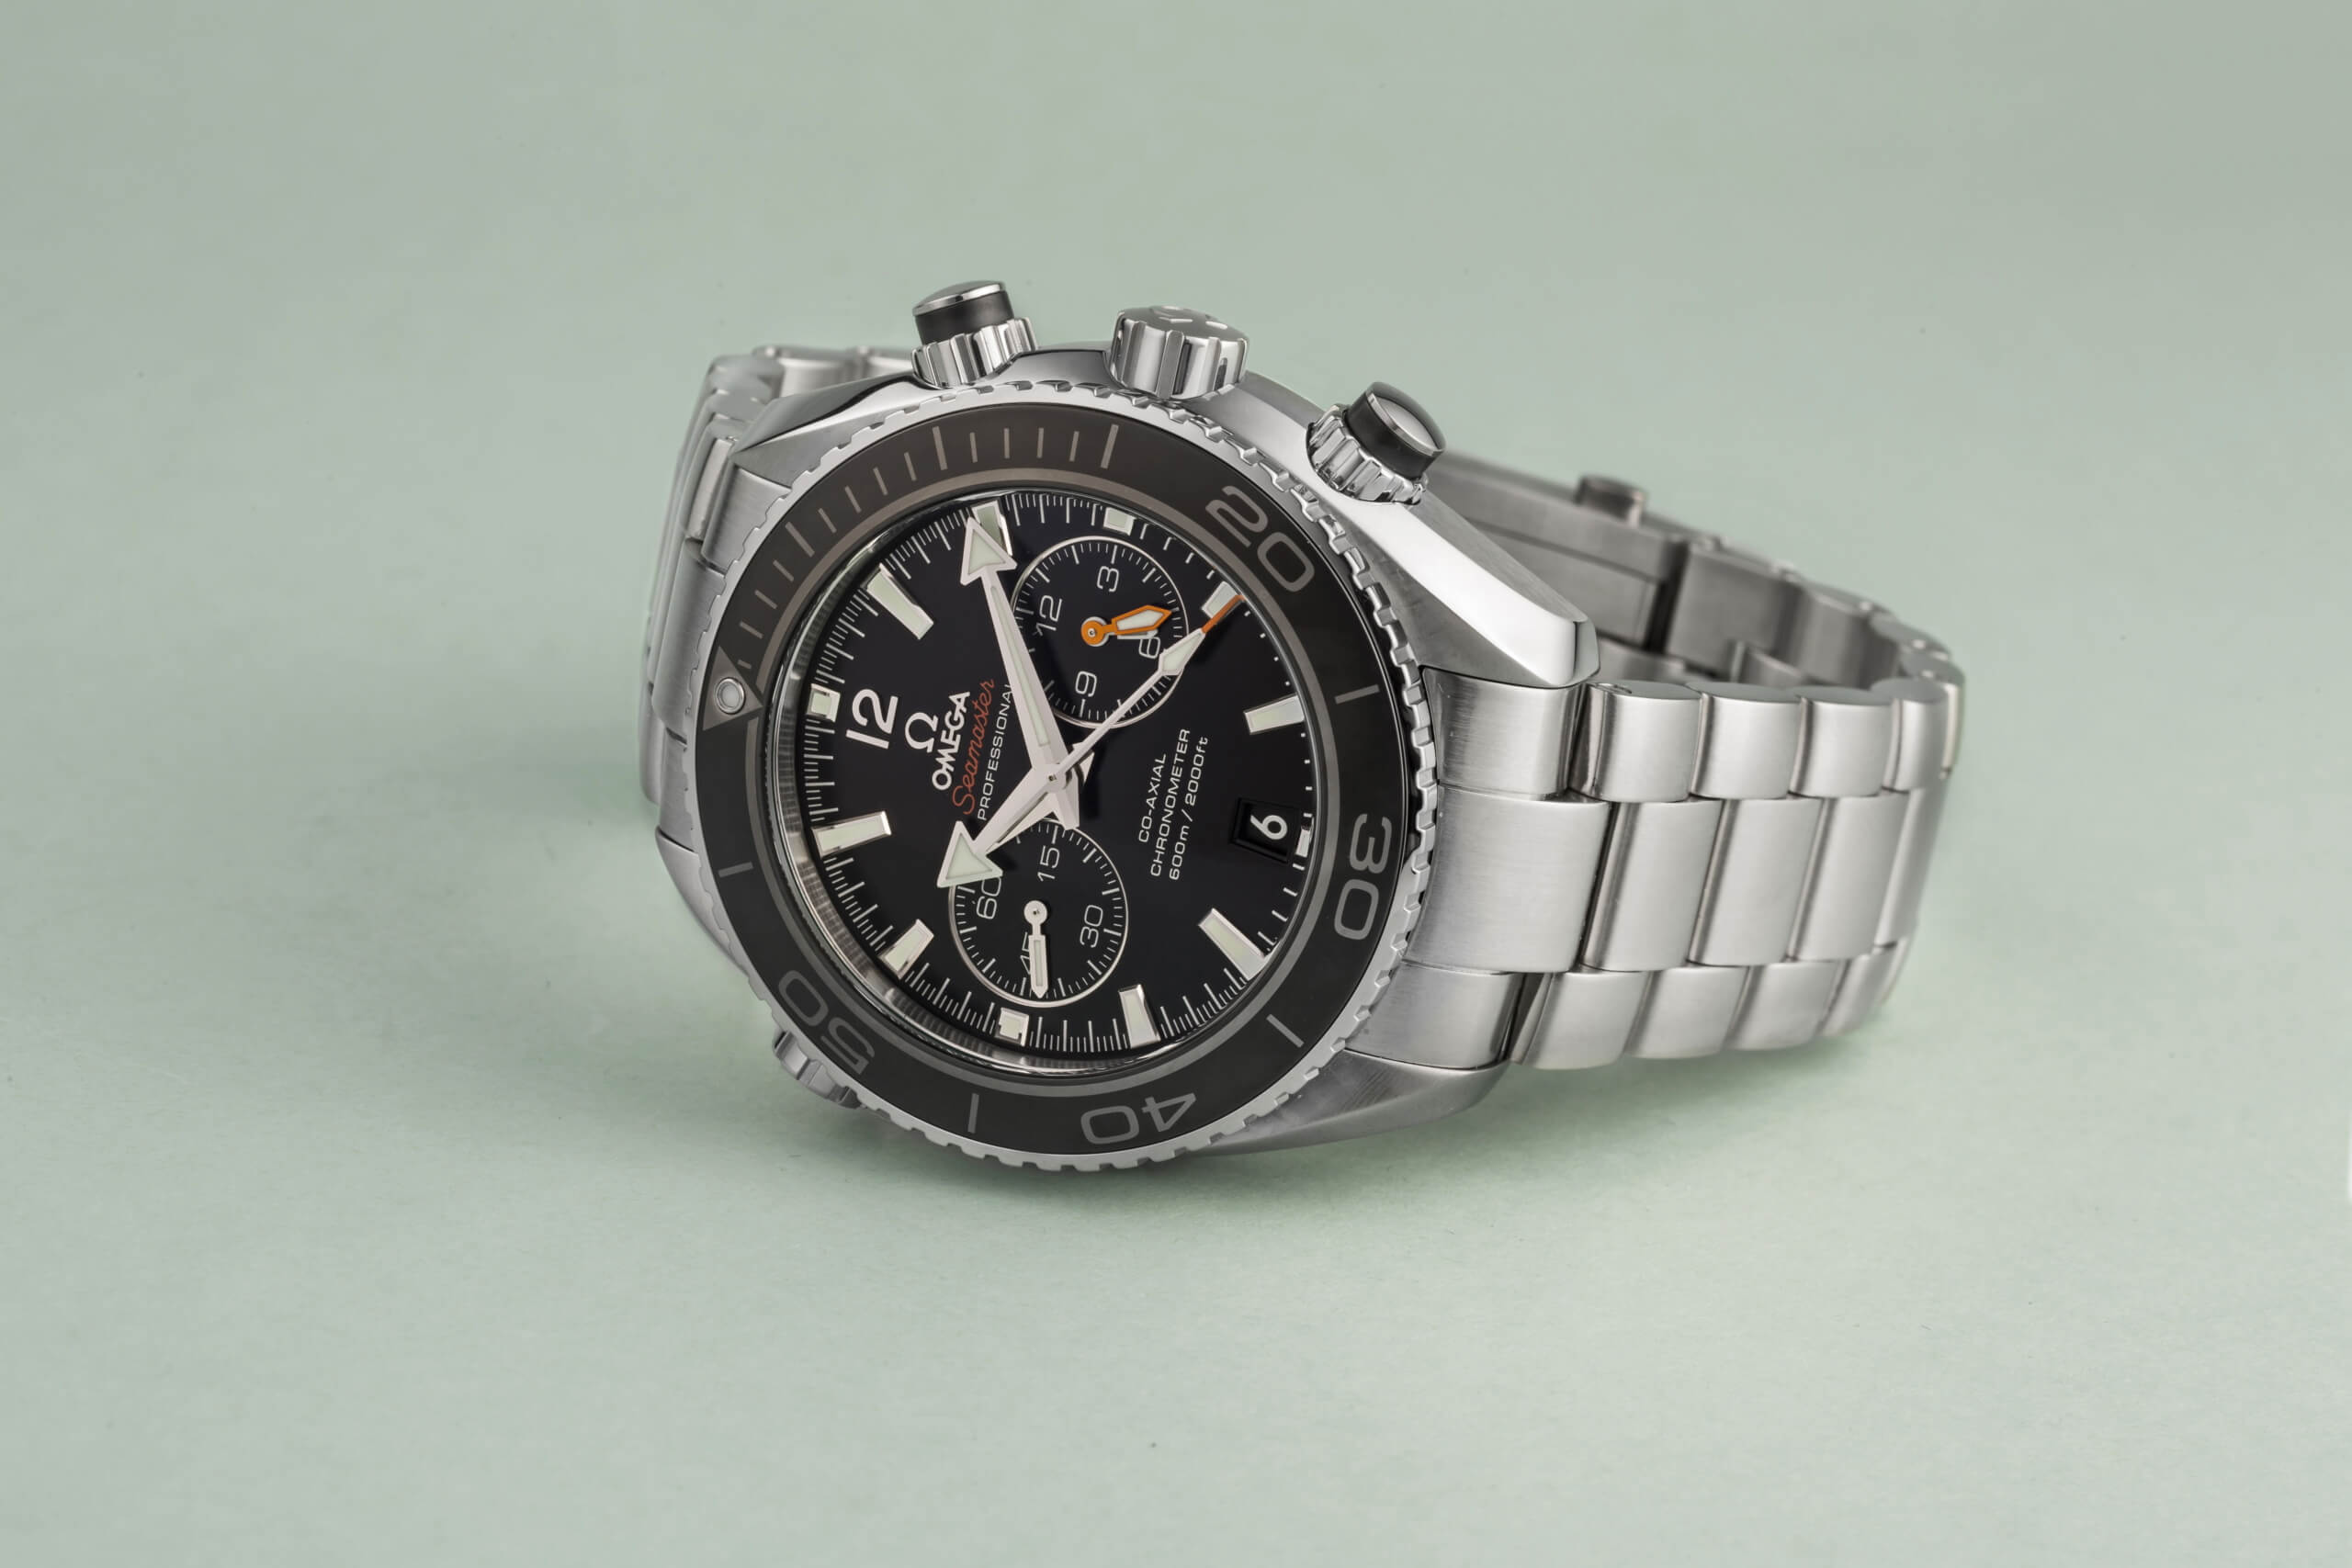 Omega Seamaster with black dial.